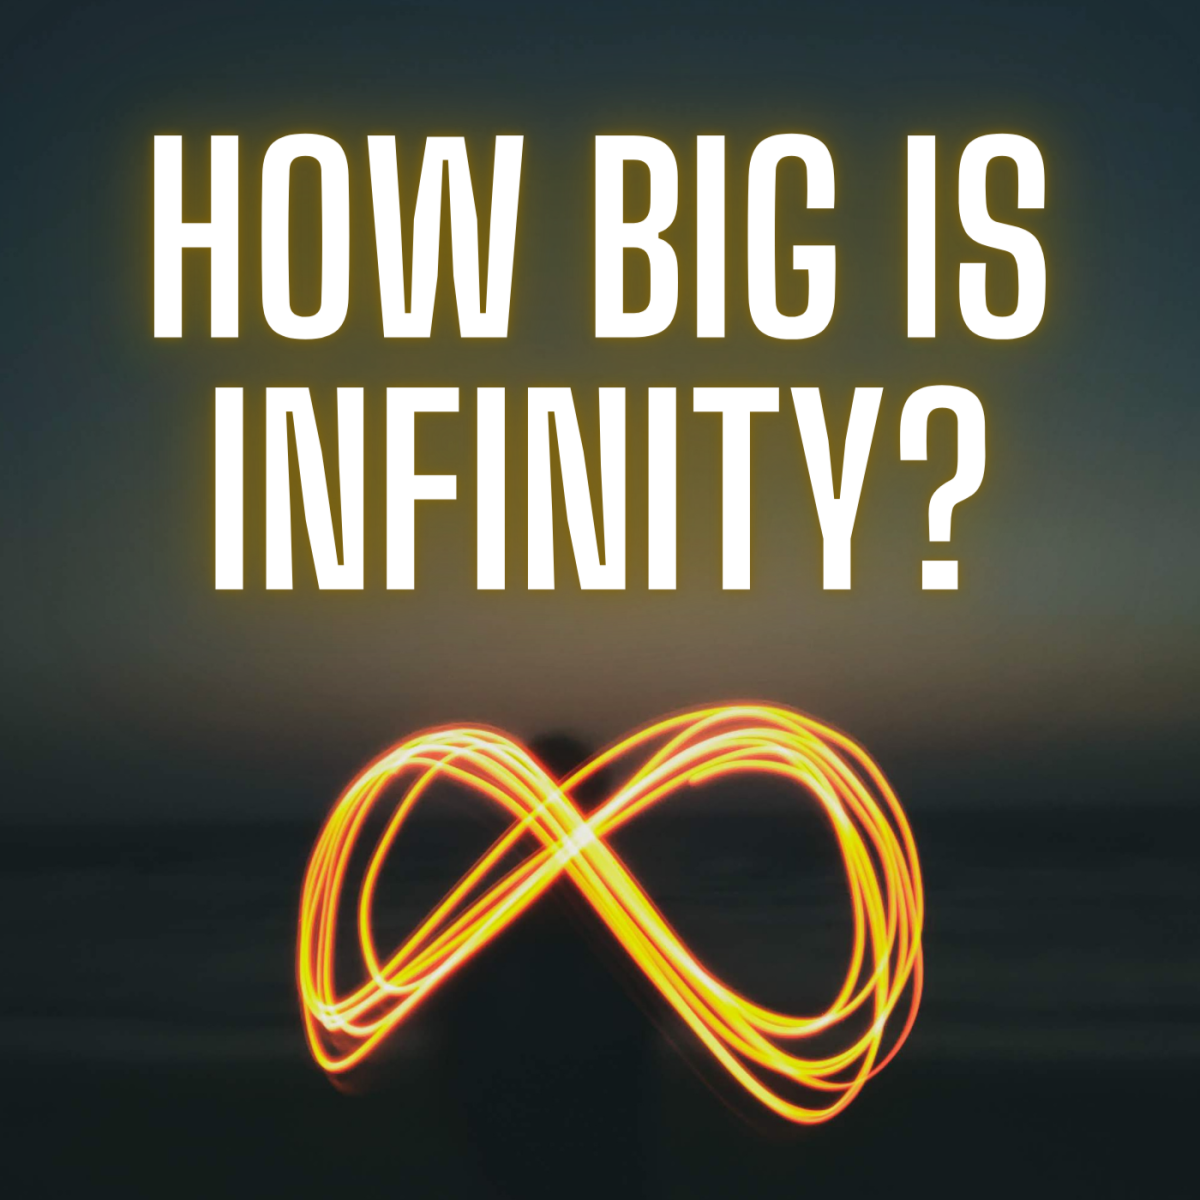 So, how big is infinity, really?